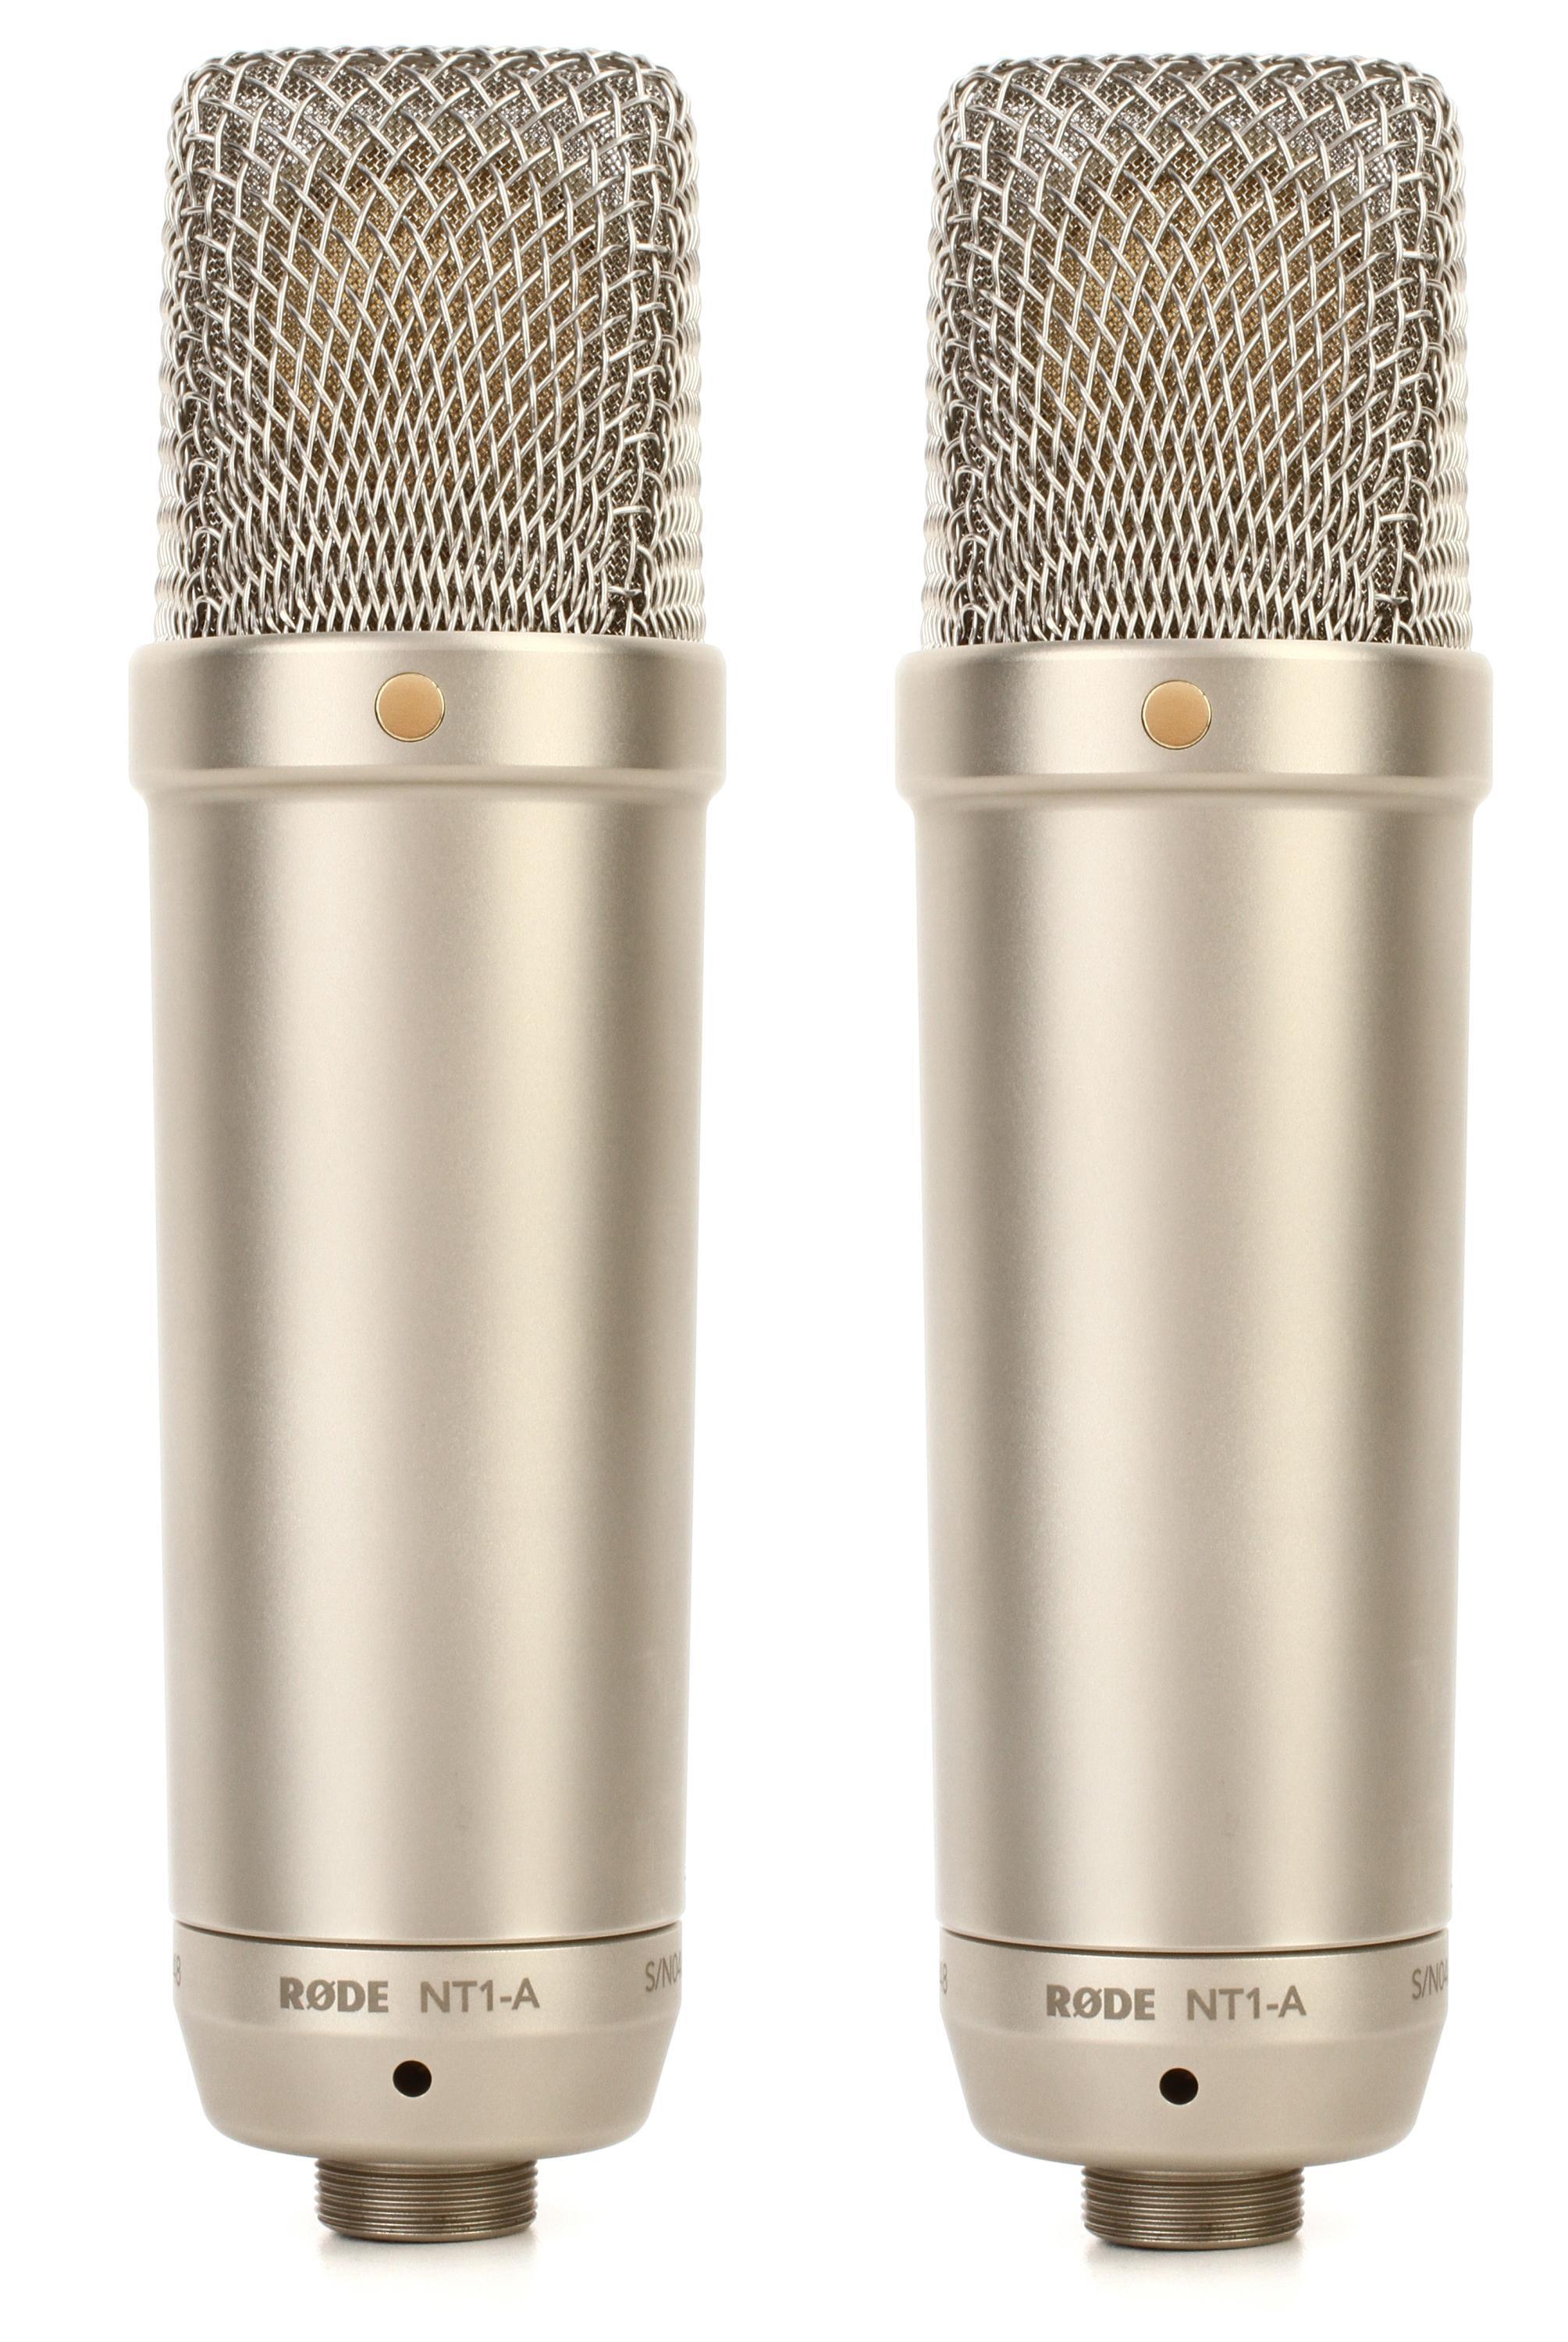 Rode NT1-A-MP Matched Pair of Large-diaphragm Condenser